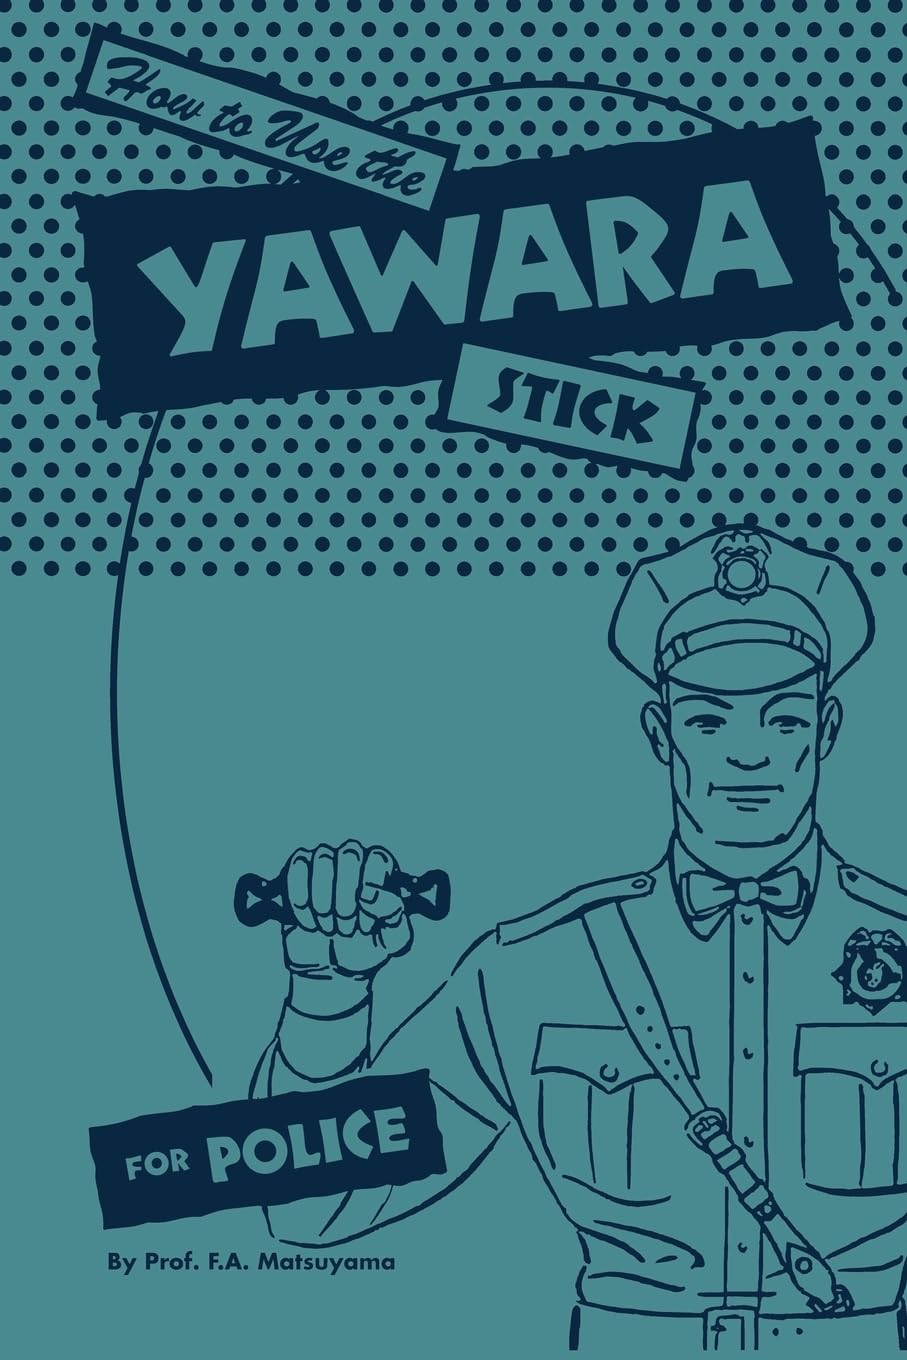 How to use the Yawara Stick for Police Book by F A Matsuyama (Reprint)